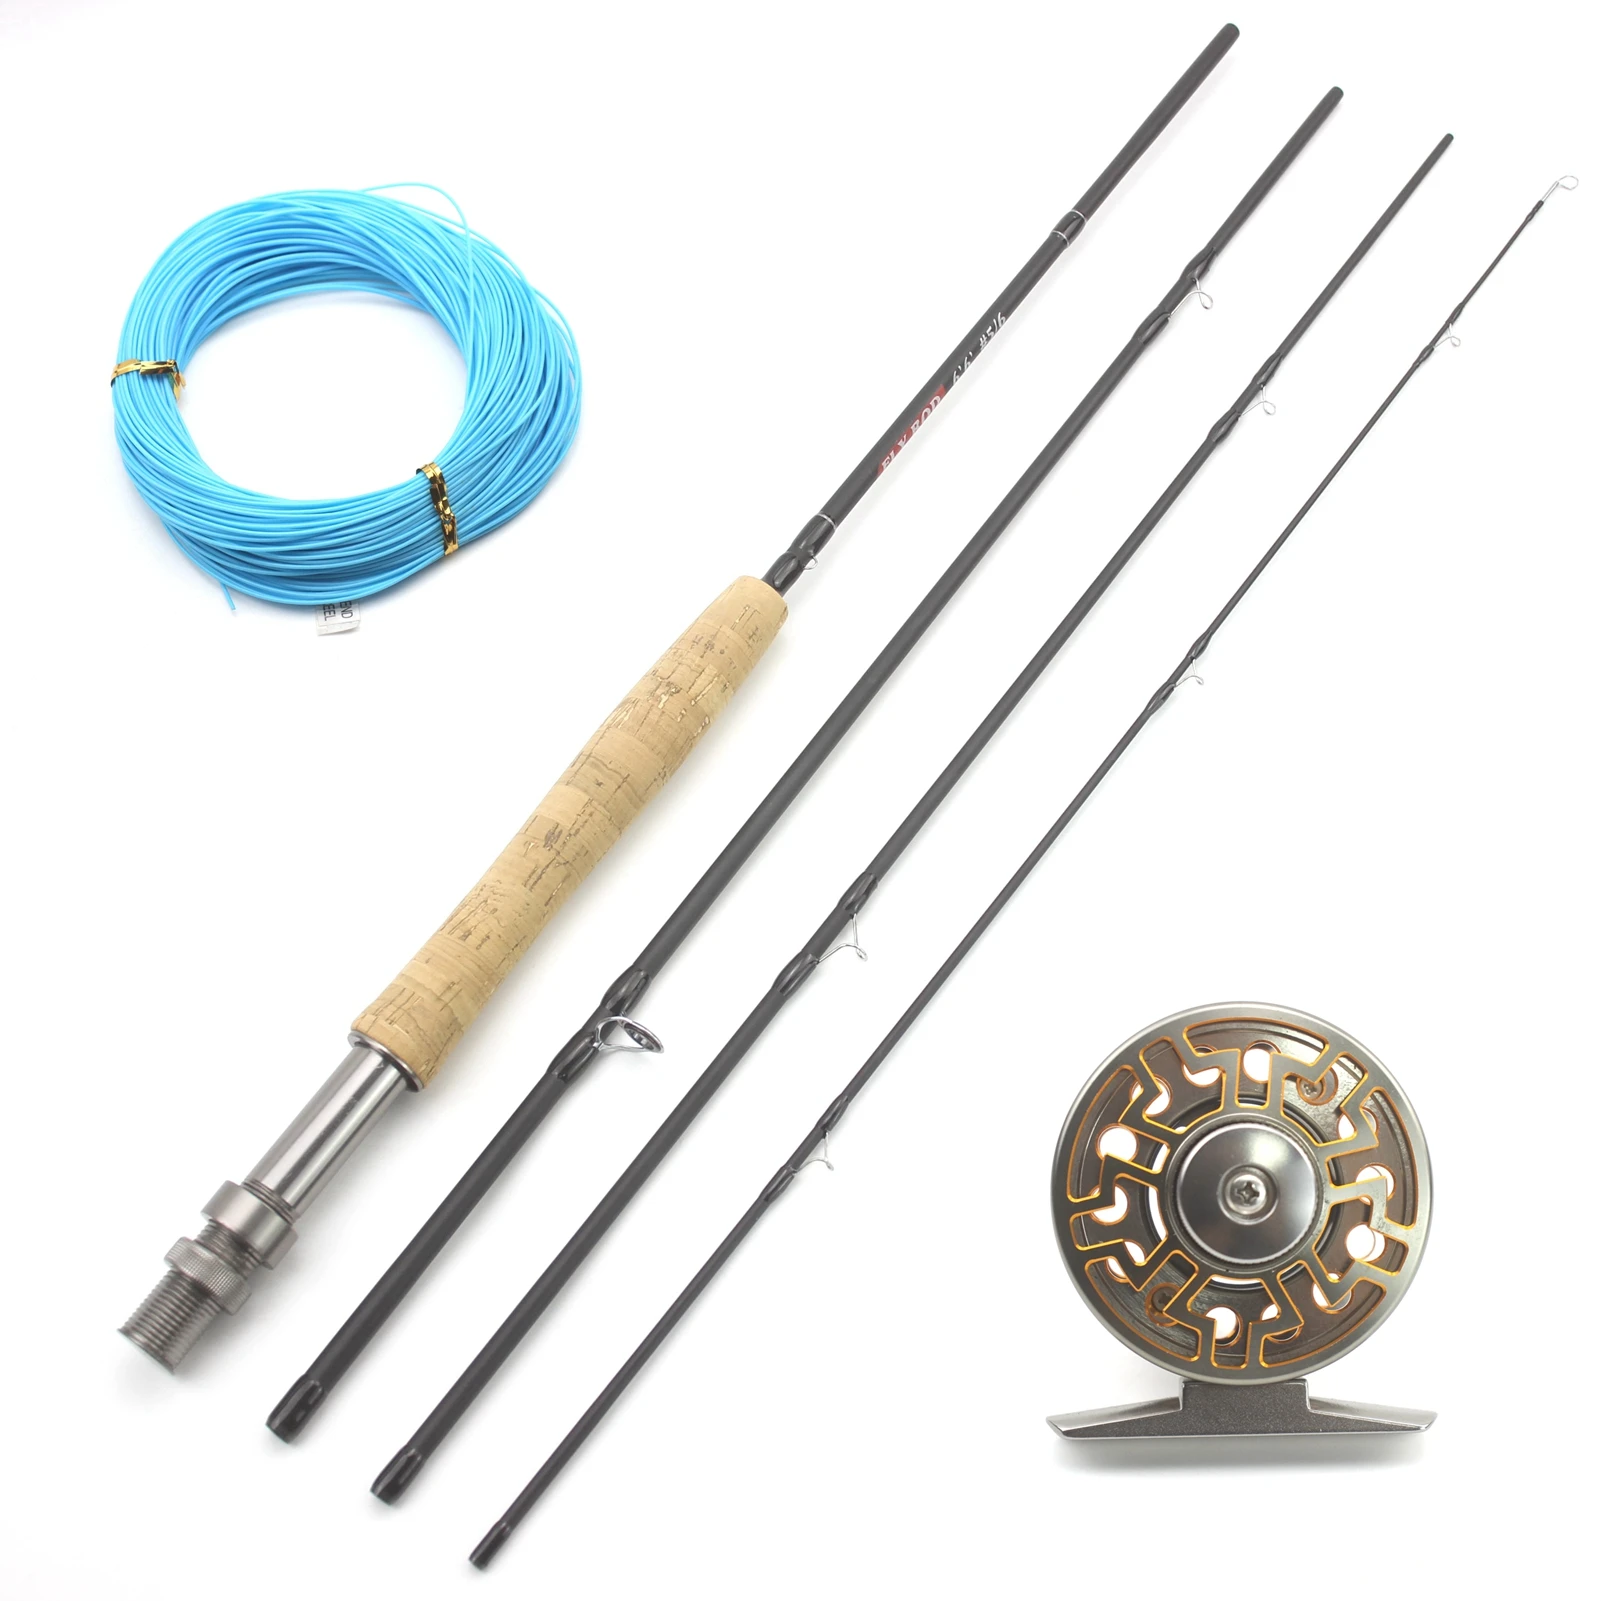 NEW 6.6Ft 7Ft Low Price Fly Fishing Rod Reel Combos Carbon Fiber 4 Section  Light Fishing Rod Beginner Fly Fishing Fishing Tackle